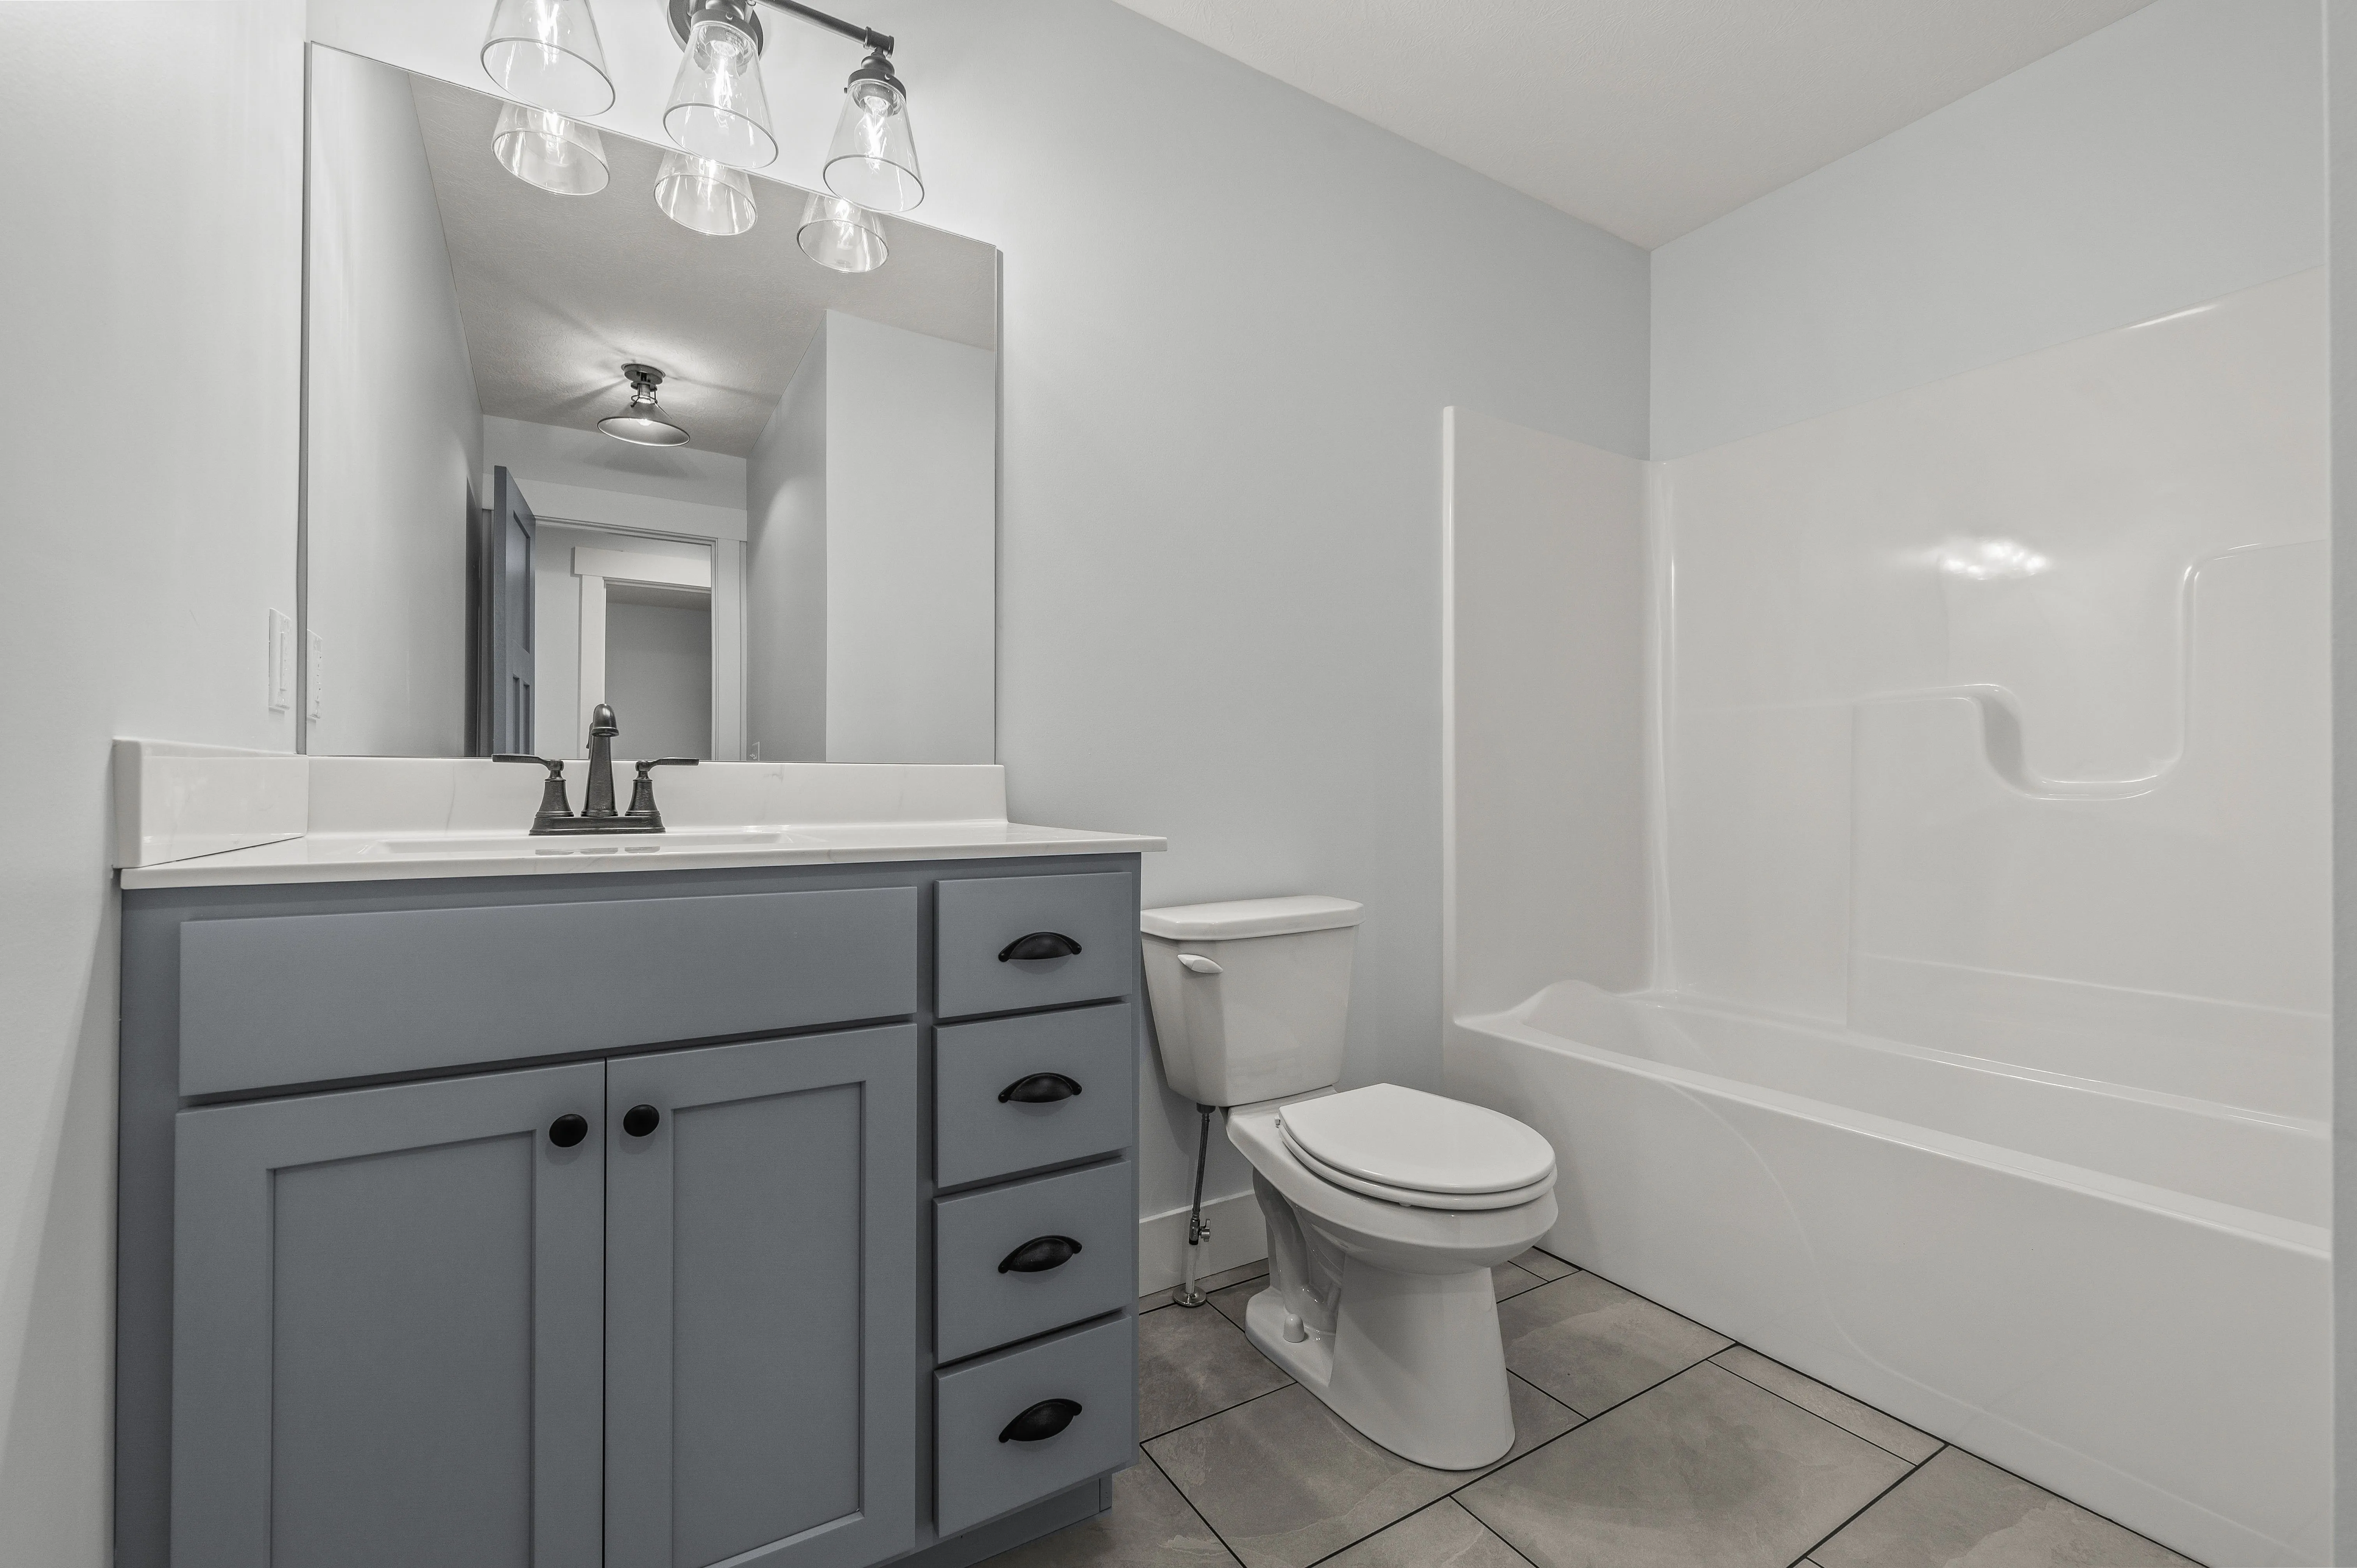 A modern bathroom interior with a gray vanity cabinet, a white countertop with a sink and faucet, a large mirror, a toilet, and a bathtub with a white surround.